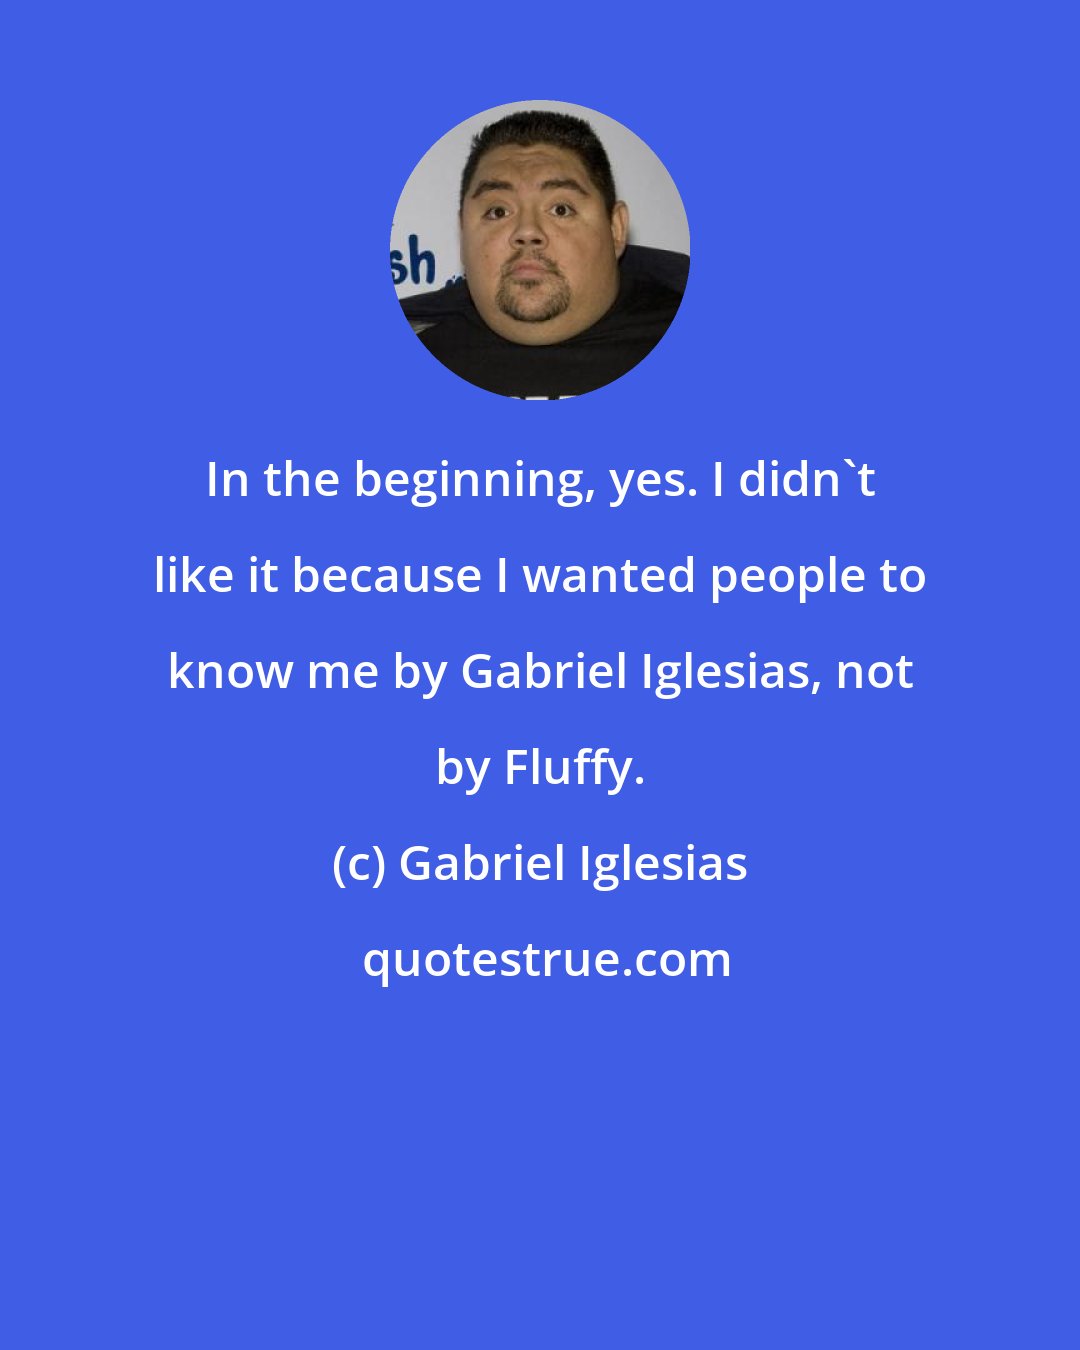 Gabriel Iglesias: In the beginning, yes. I didn't like it because I wanted people to know me by Gabriel Iglesias, not by Fluffy.